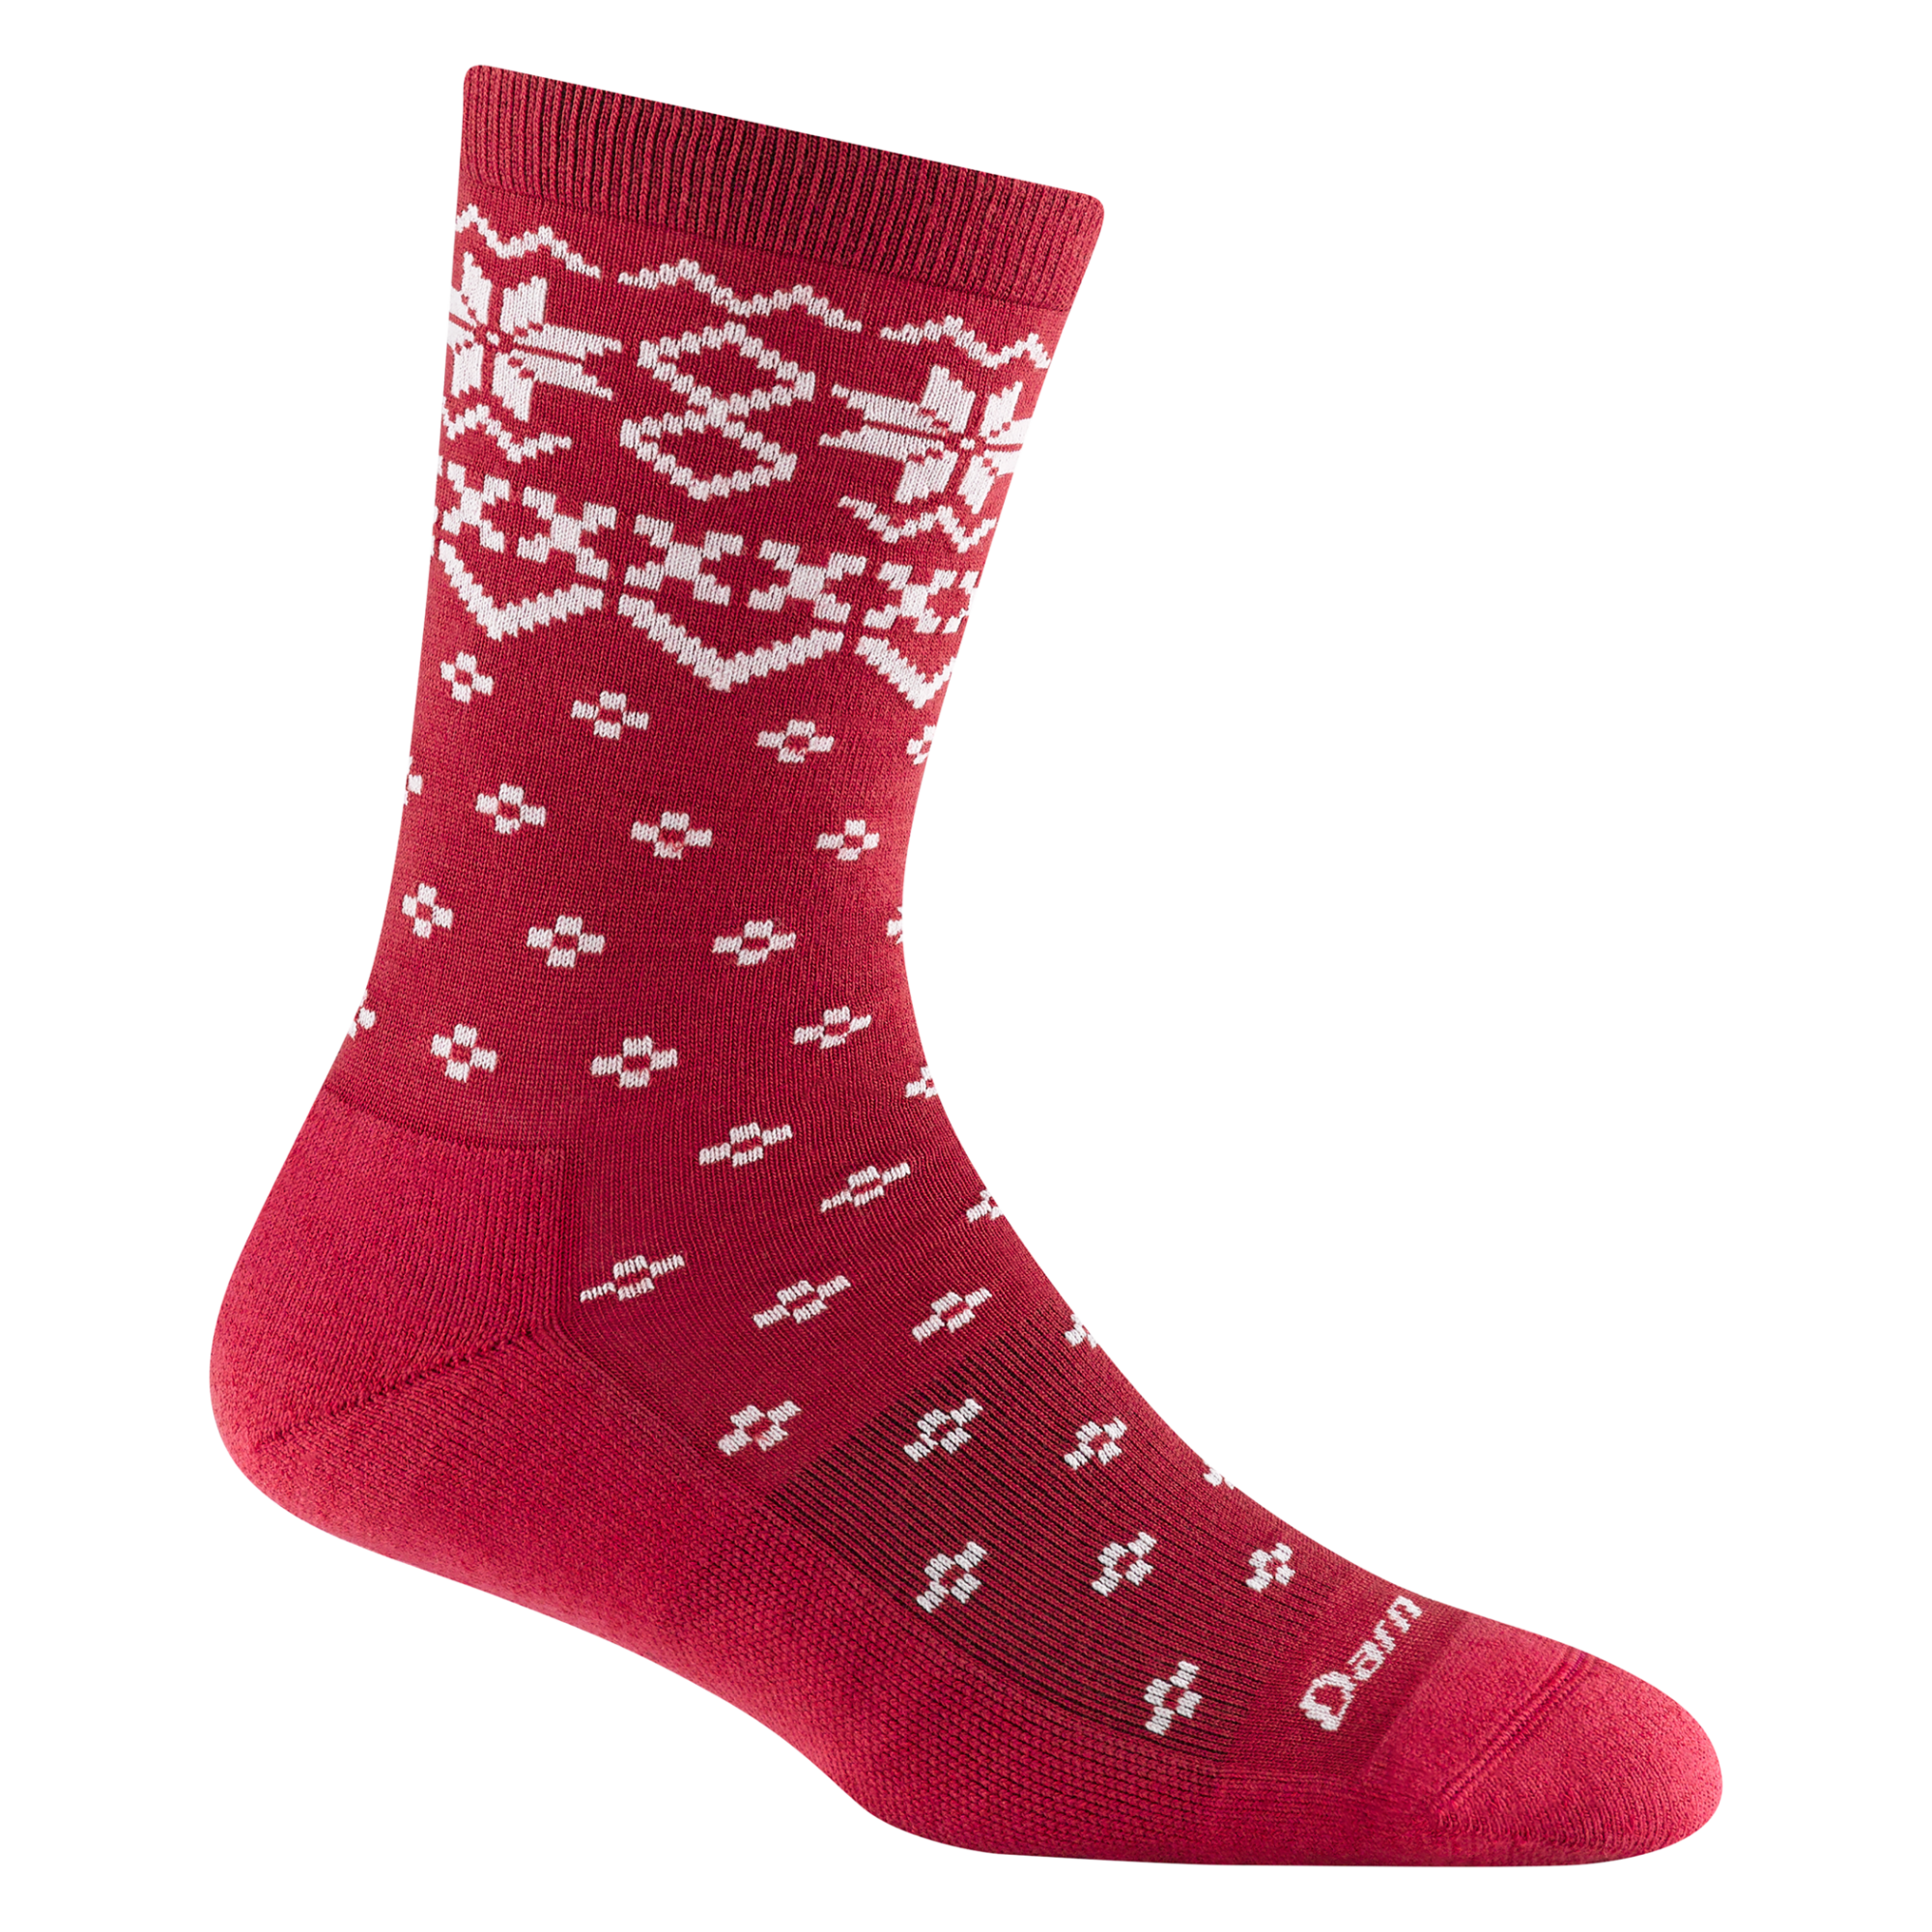 6088 women's shetland crew lifestyle sock in color cranberry with white traditional holiday print on forefoot and ankle